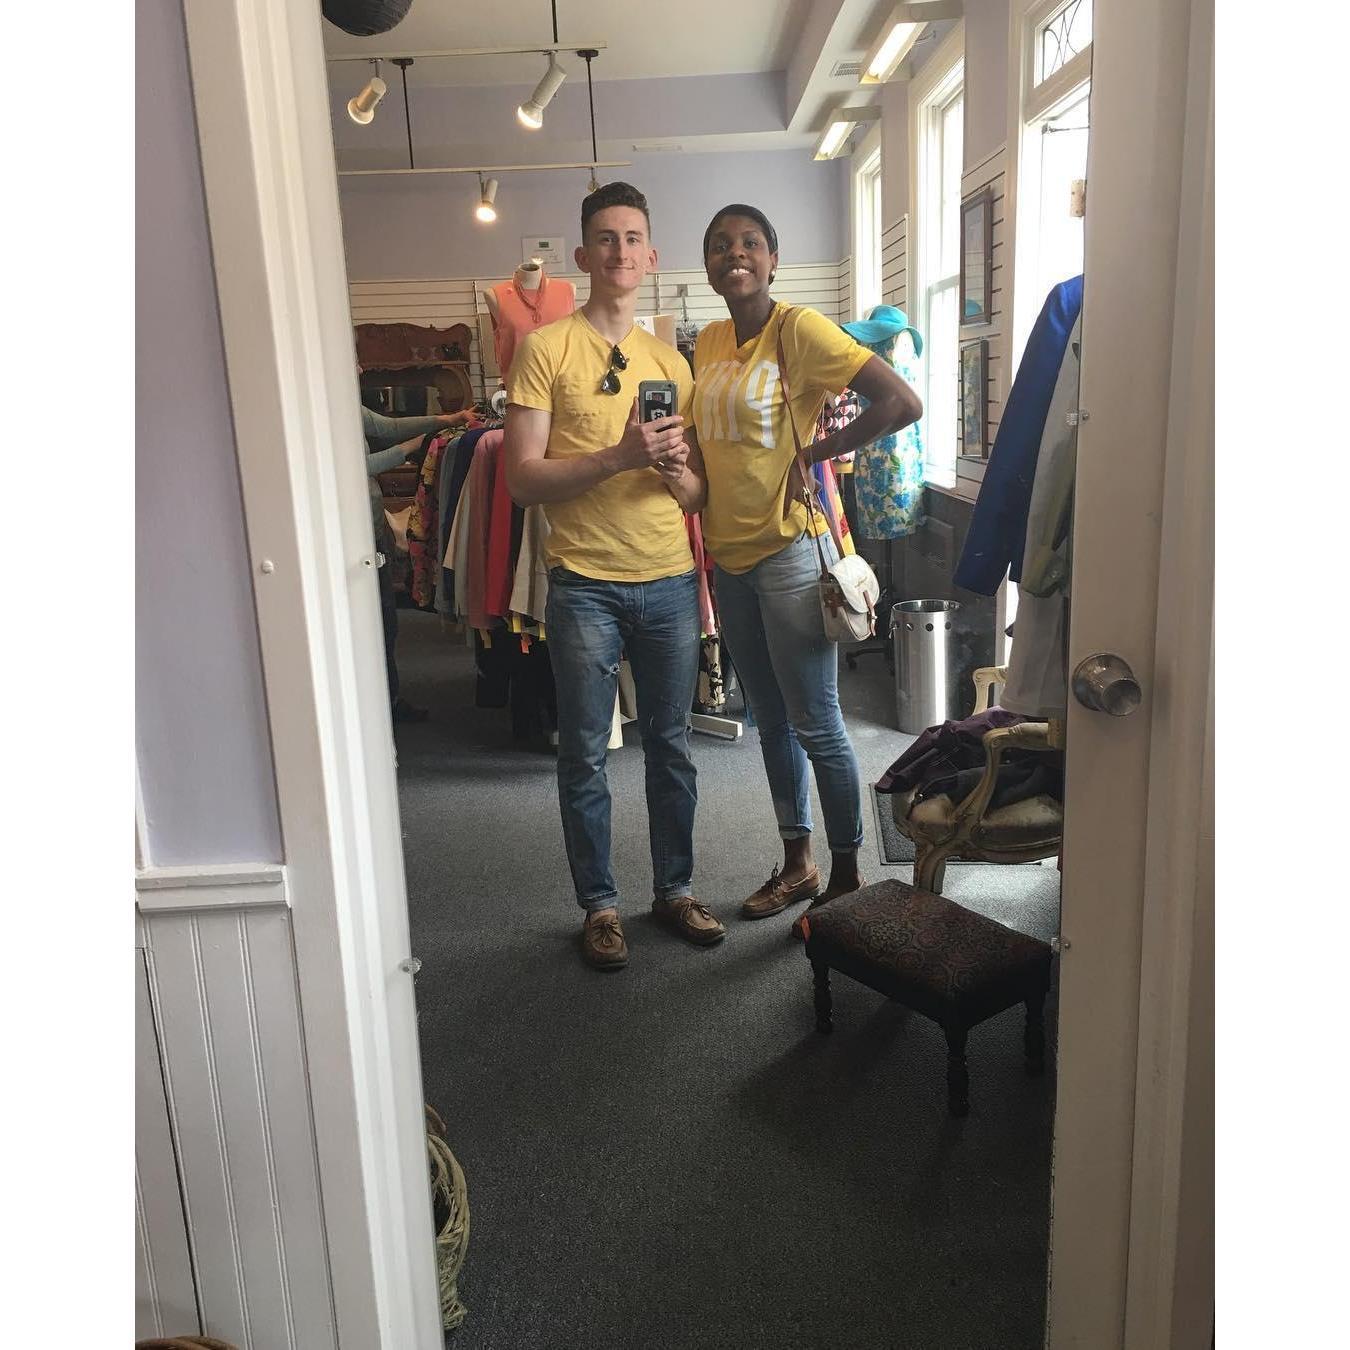 shopping while matching in Alexandria